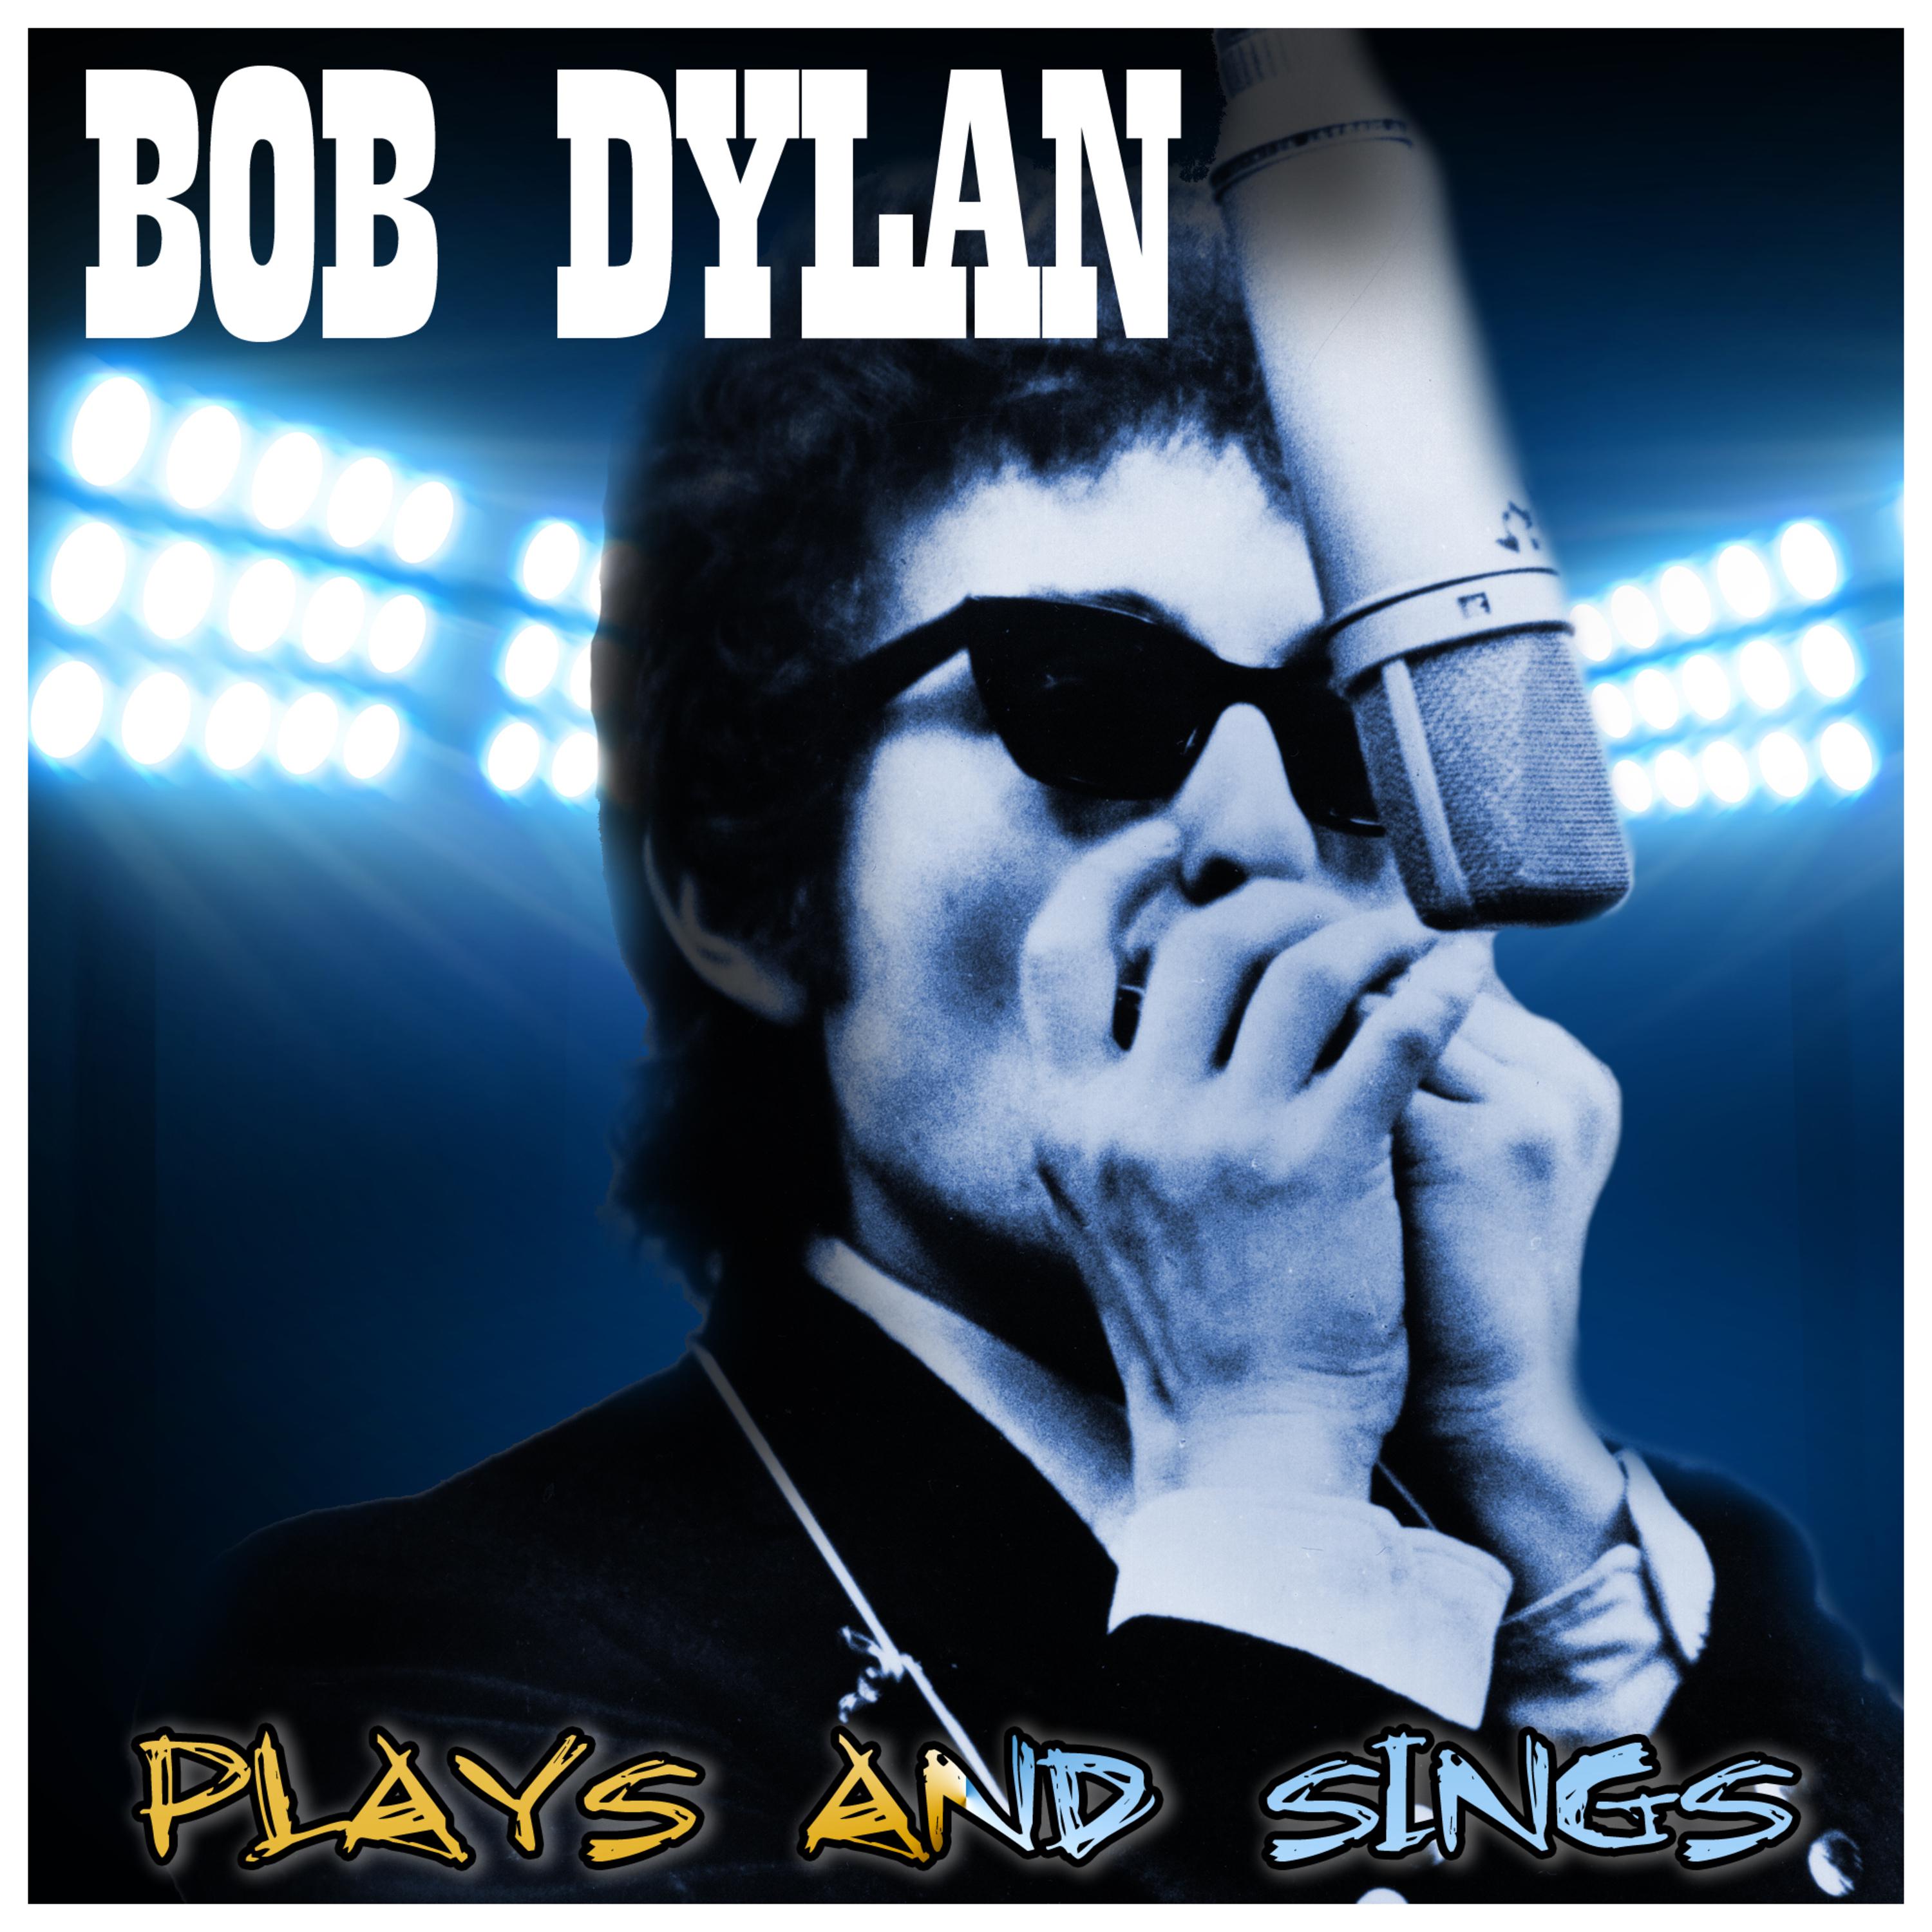 Bob Dylan Plays And Sings